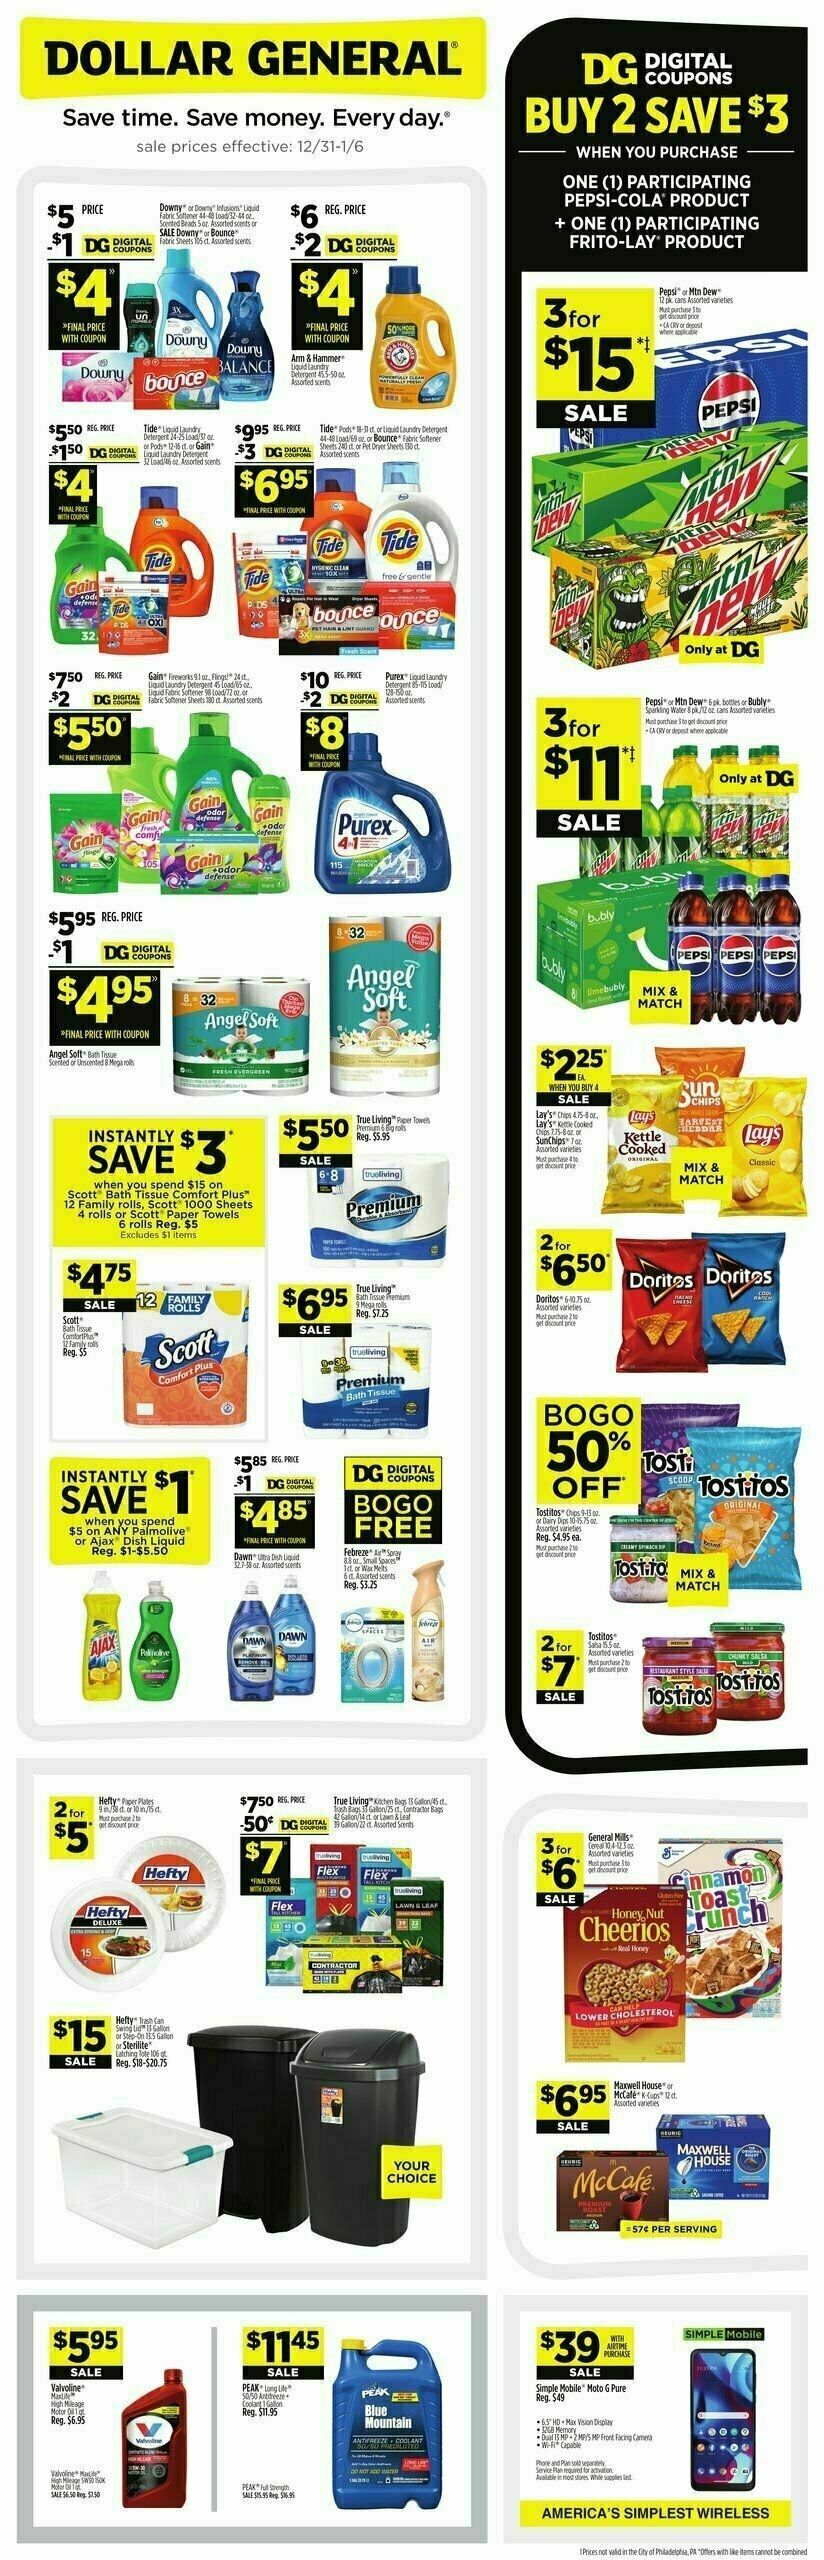 Dollar General Weekly Ad from December 31